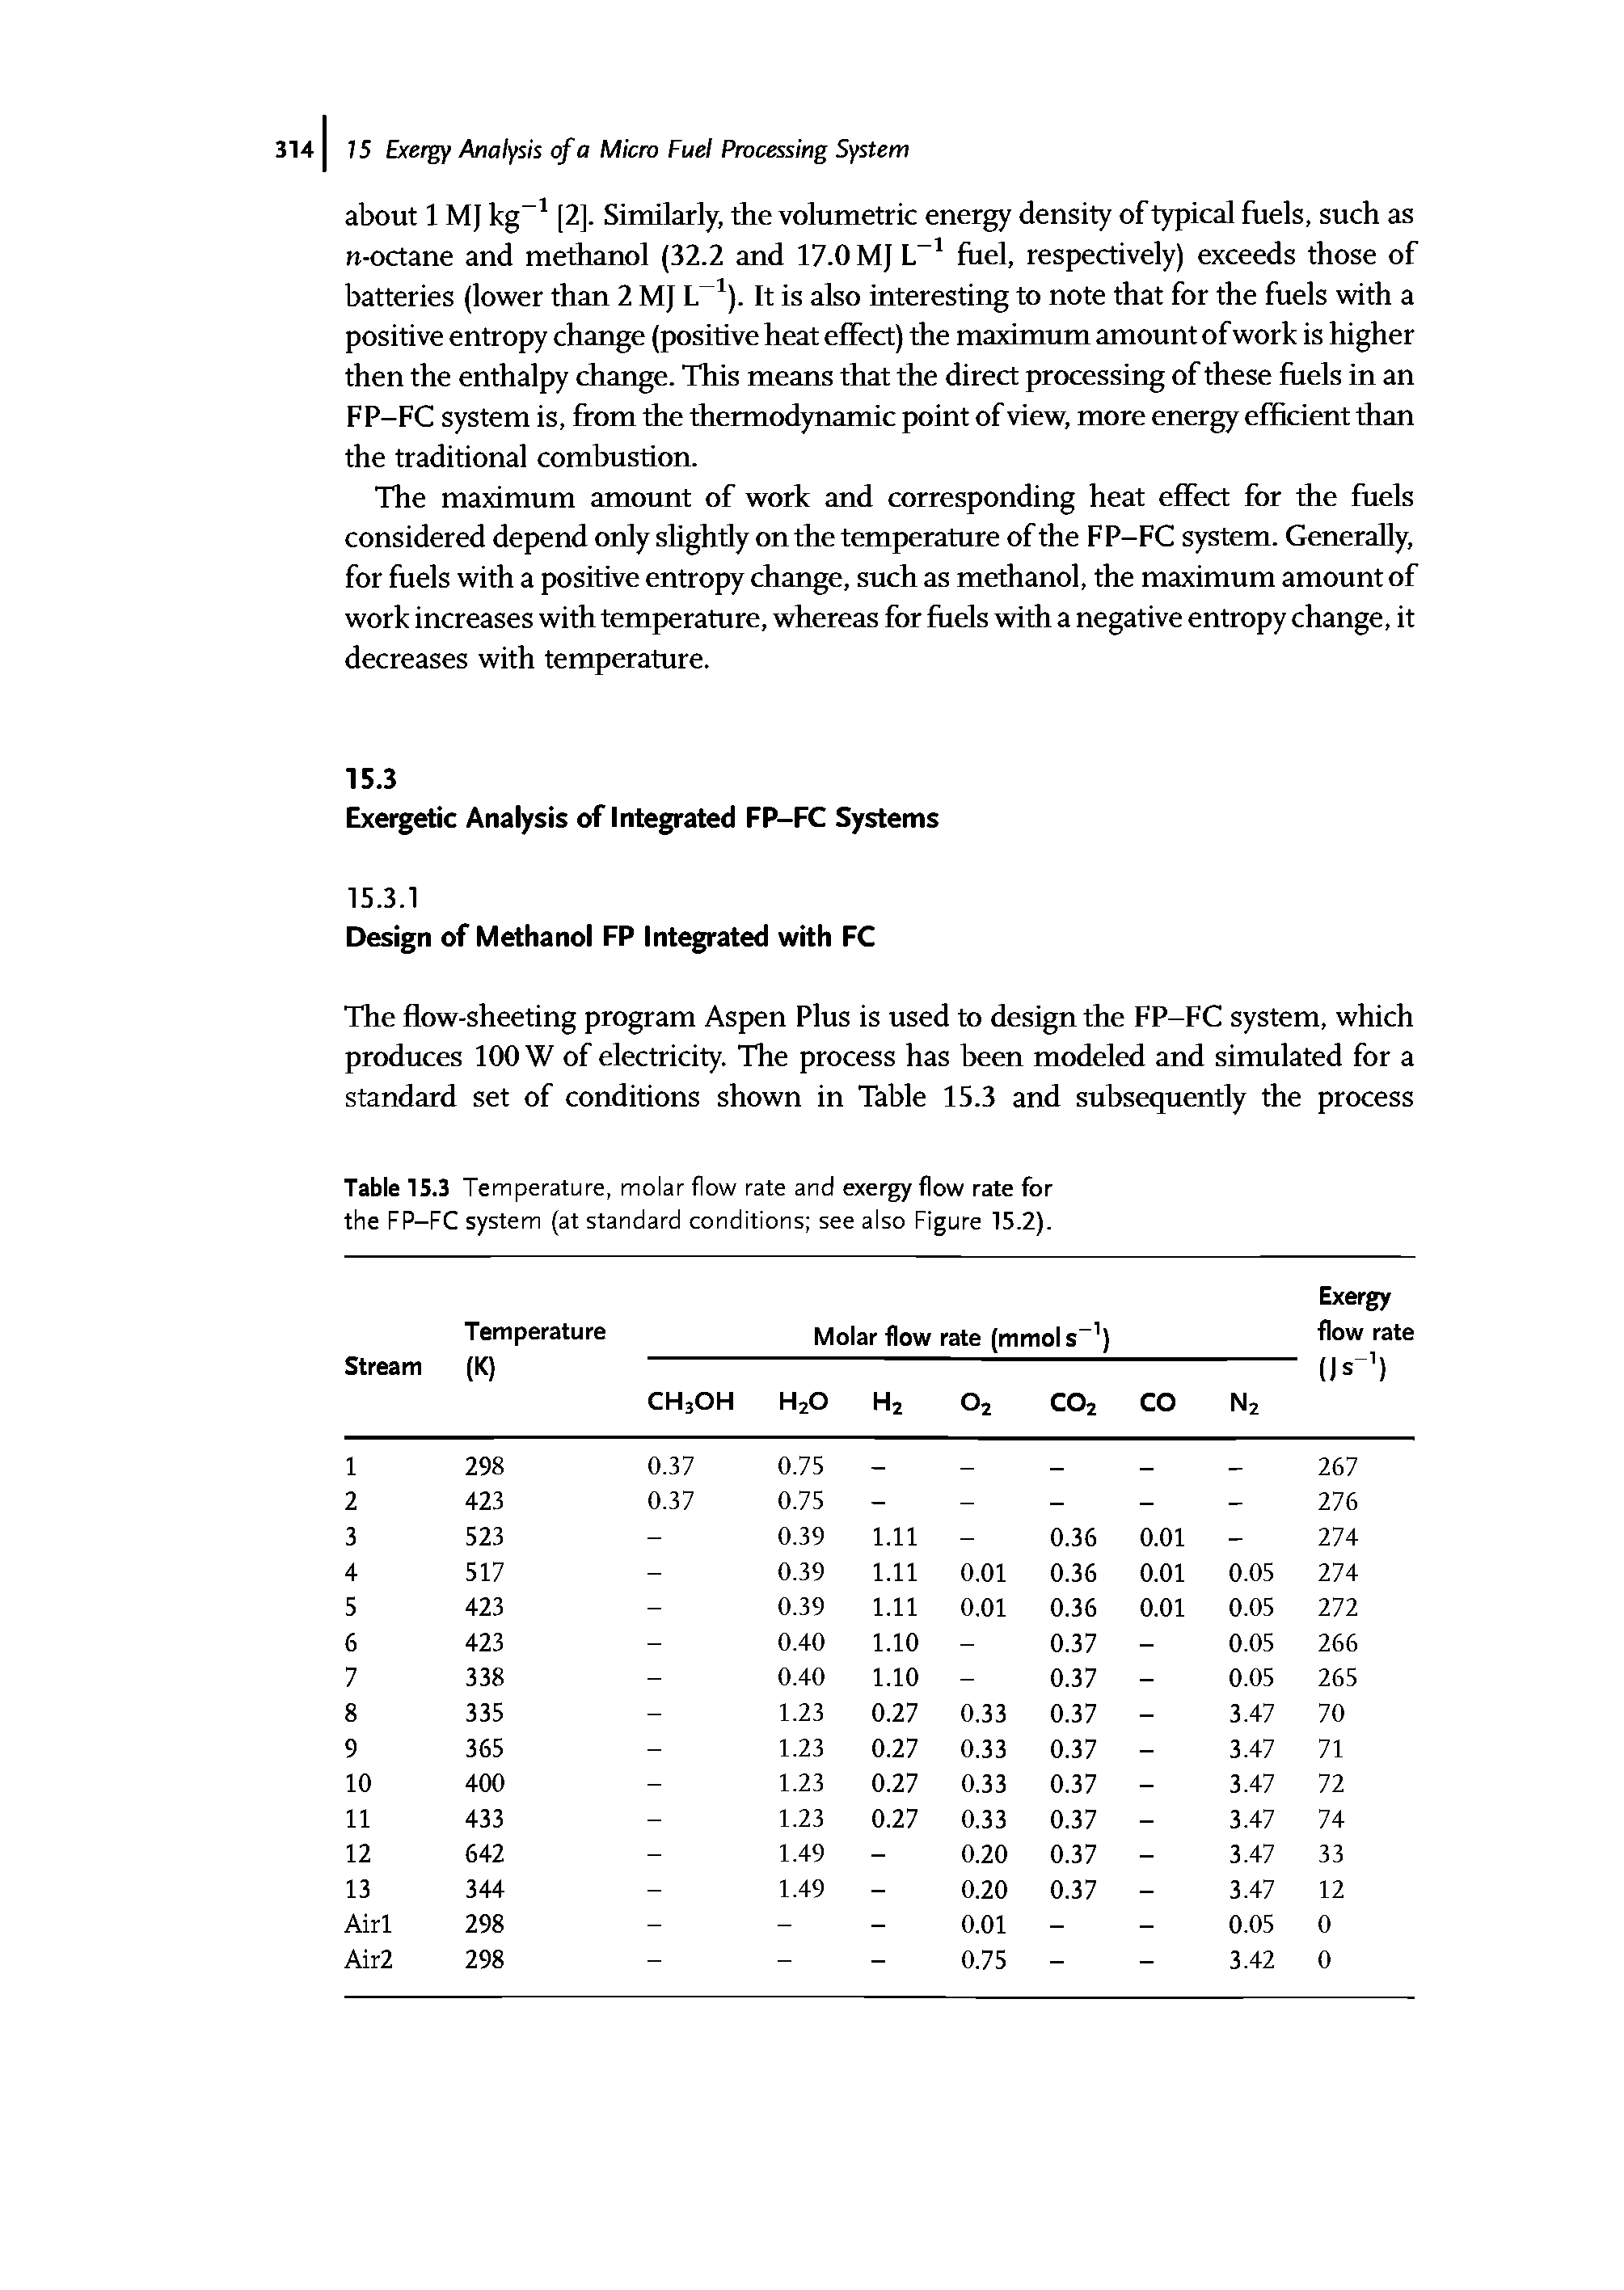 Table 15.3 Temperature, molar flow rate and exergy flow rate for the FP-FC system (at standard conditions see also Figure 15.2).